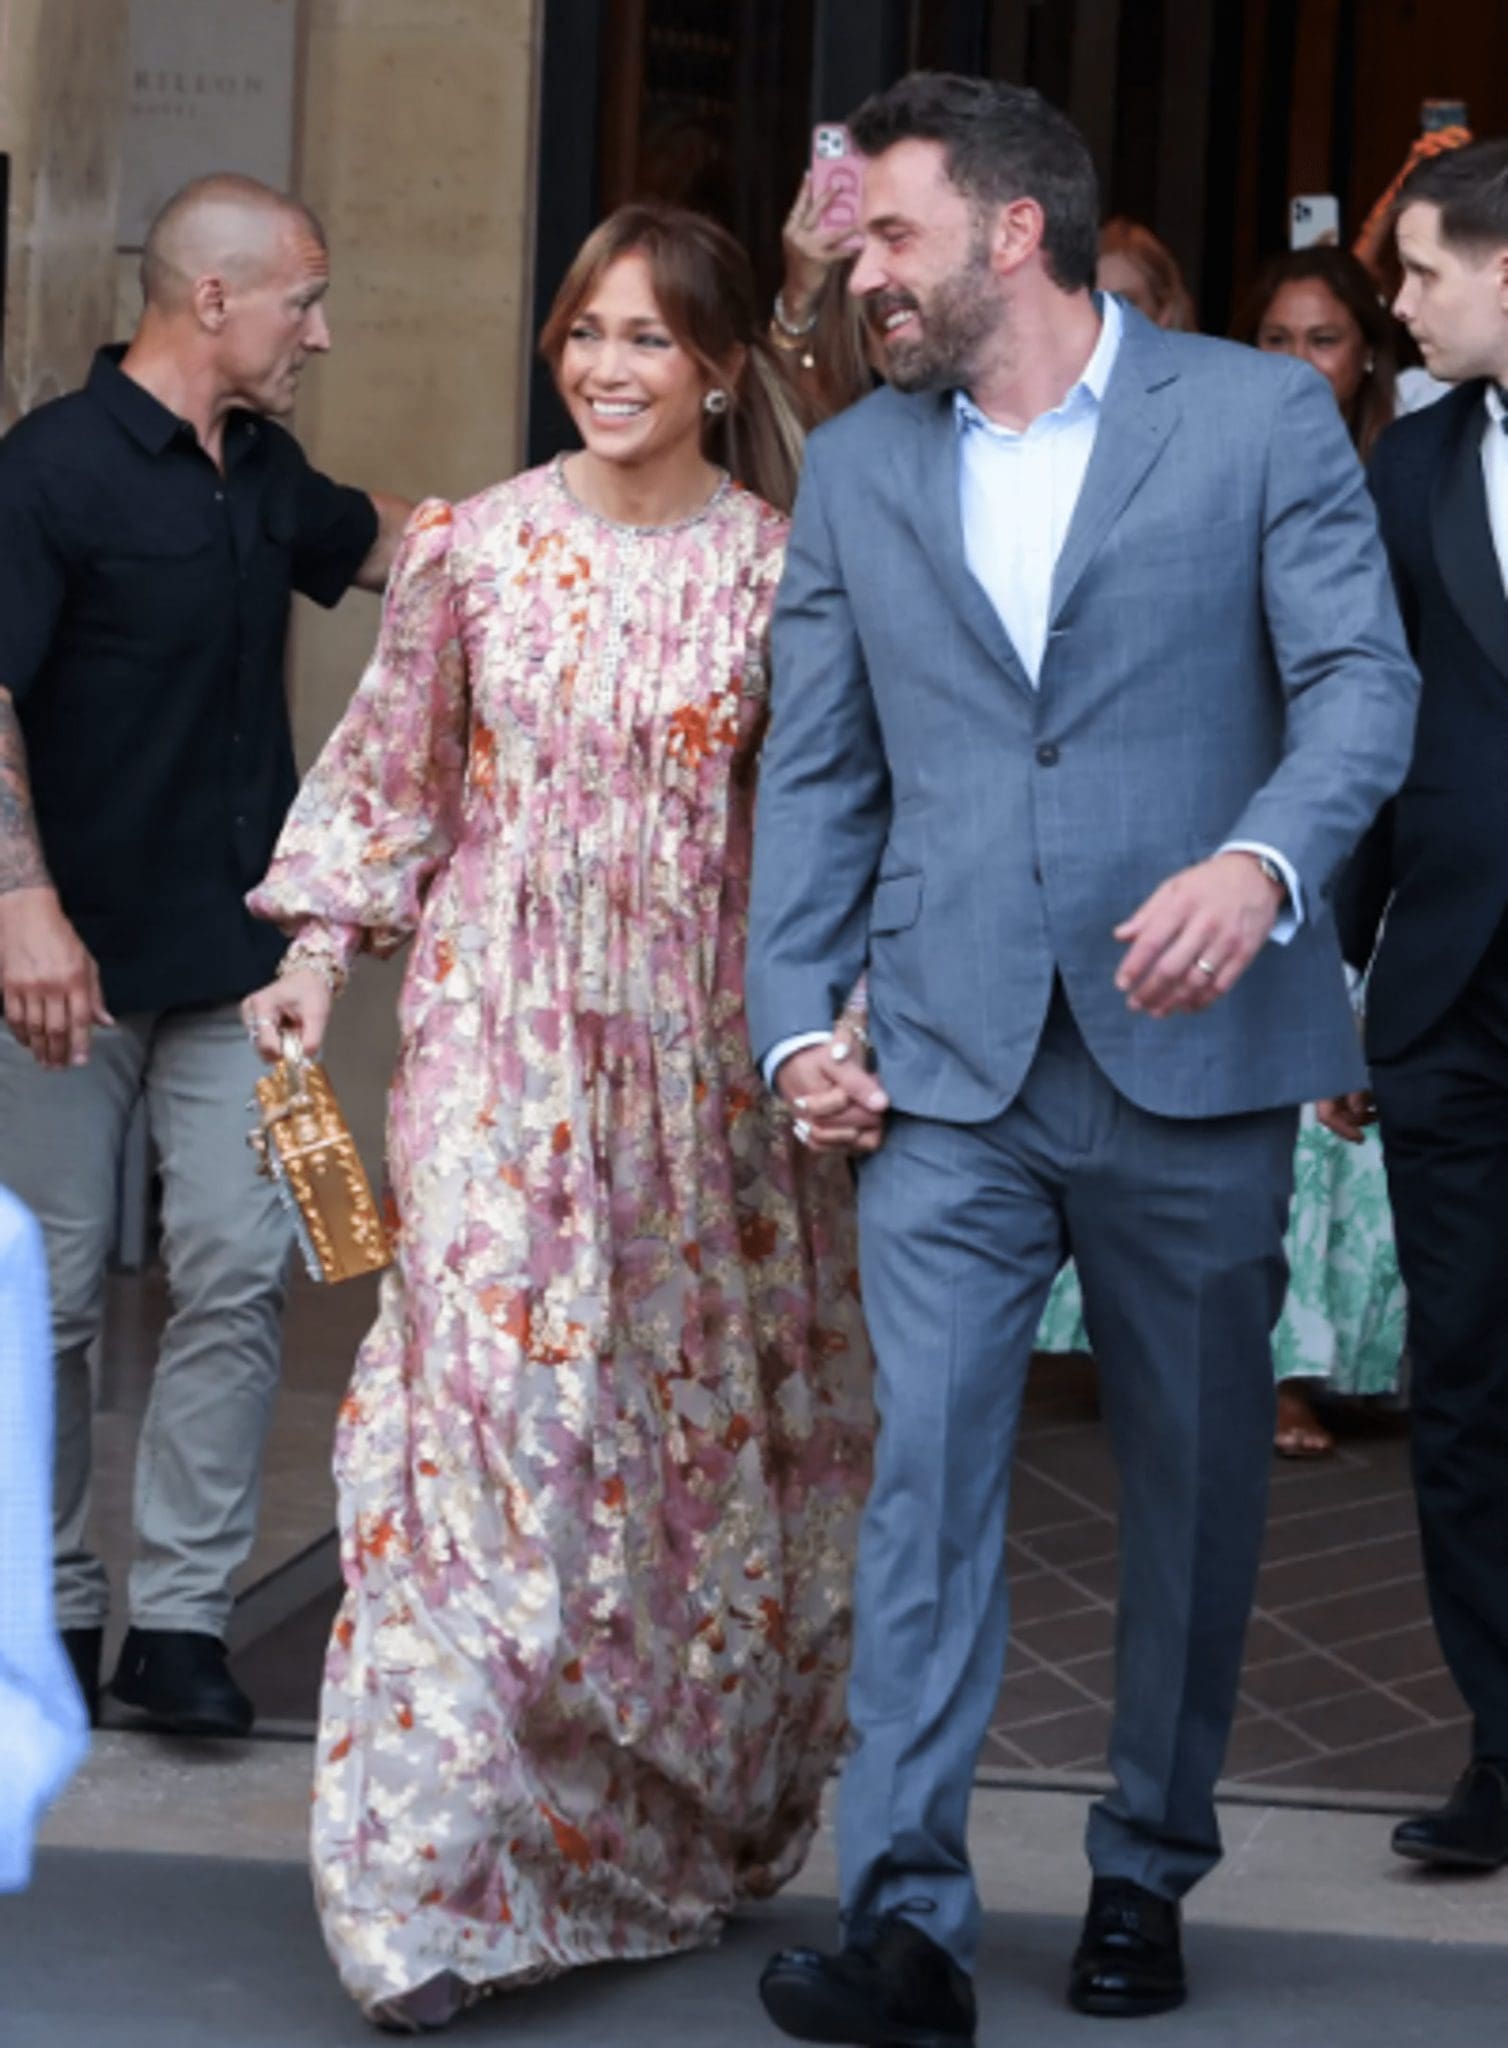 The Weekend-Long Wedding Festivities For Ben Affleck And Jennifer Lopez Will Take Place In Georgia